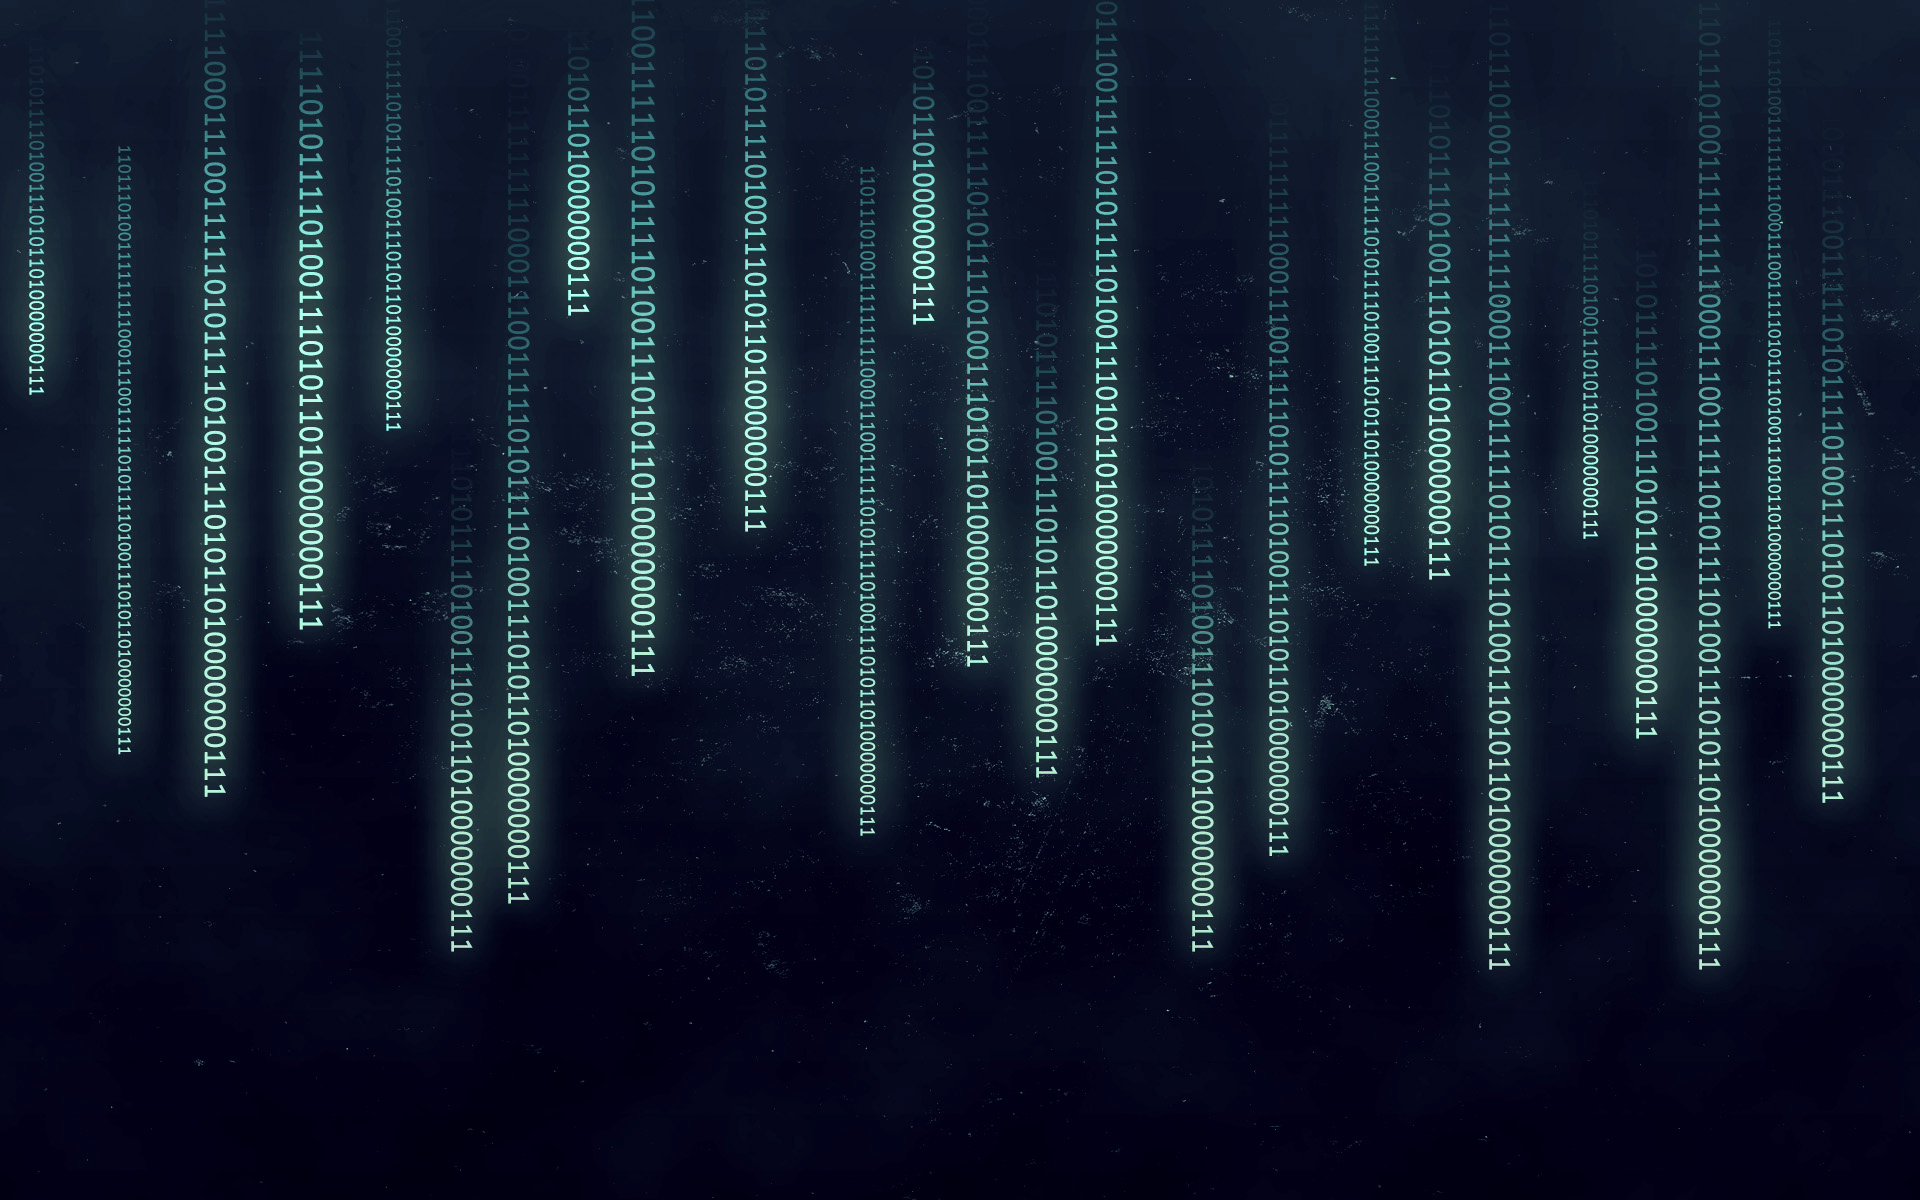 Coding Wallpapers HD (82+ images)